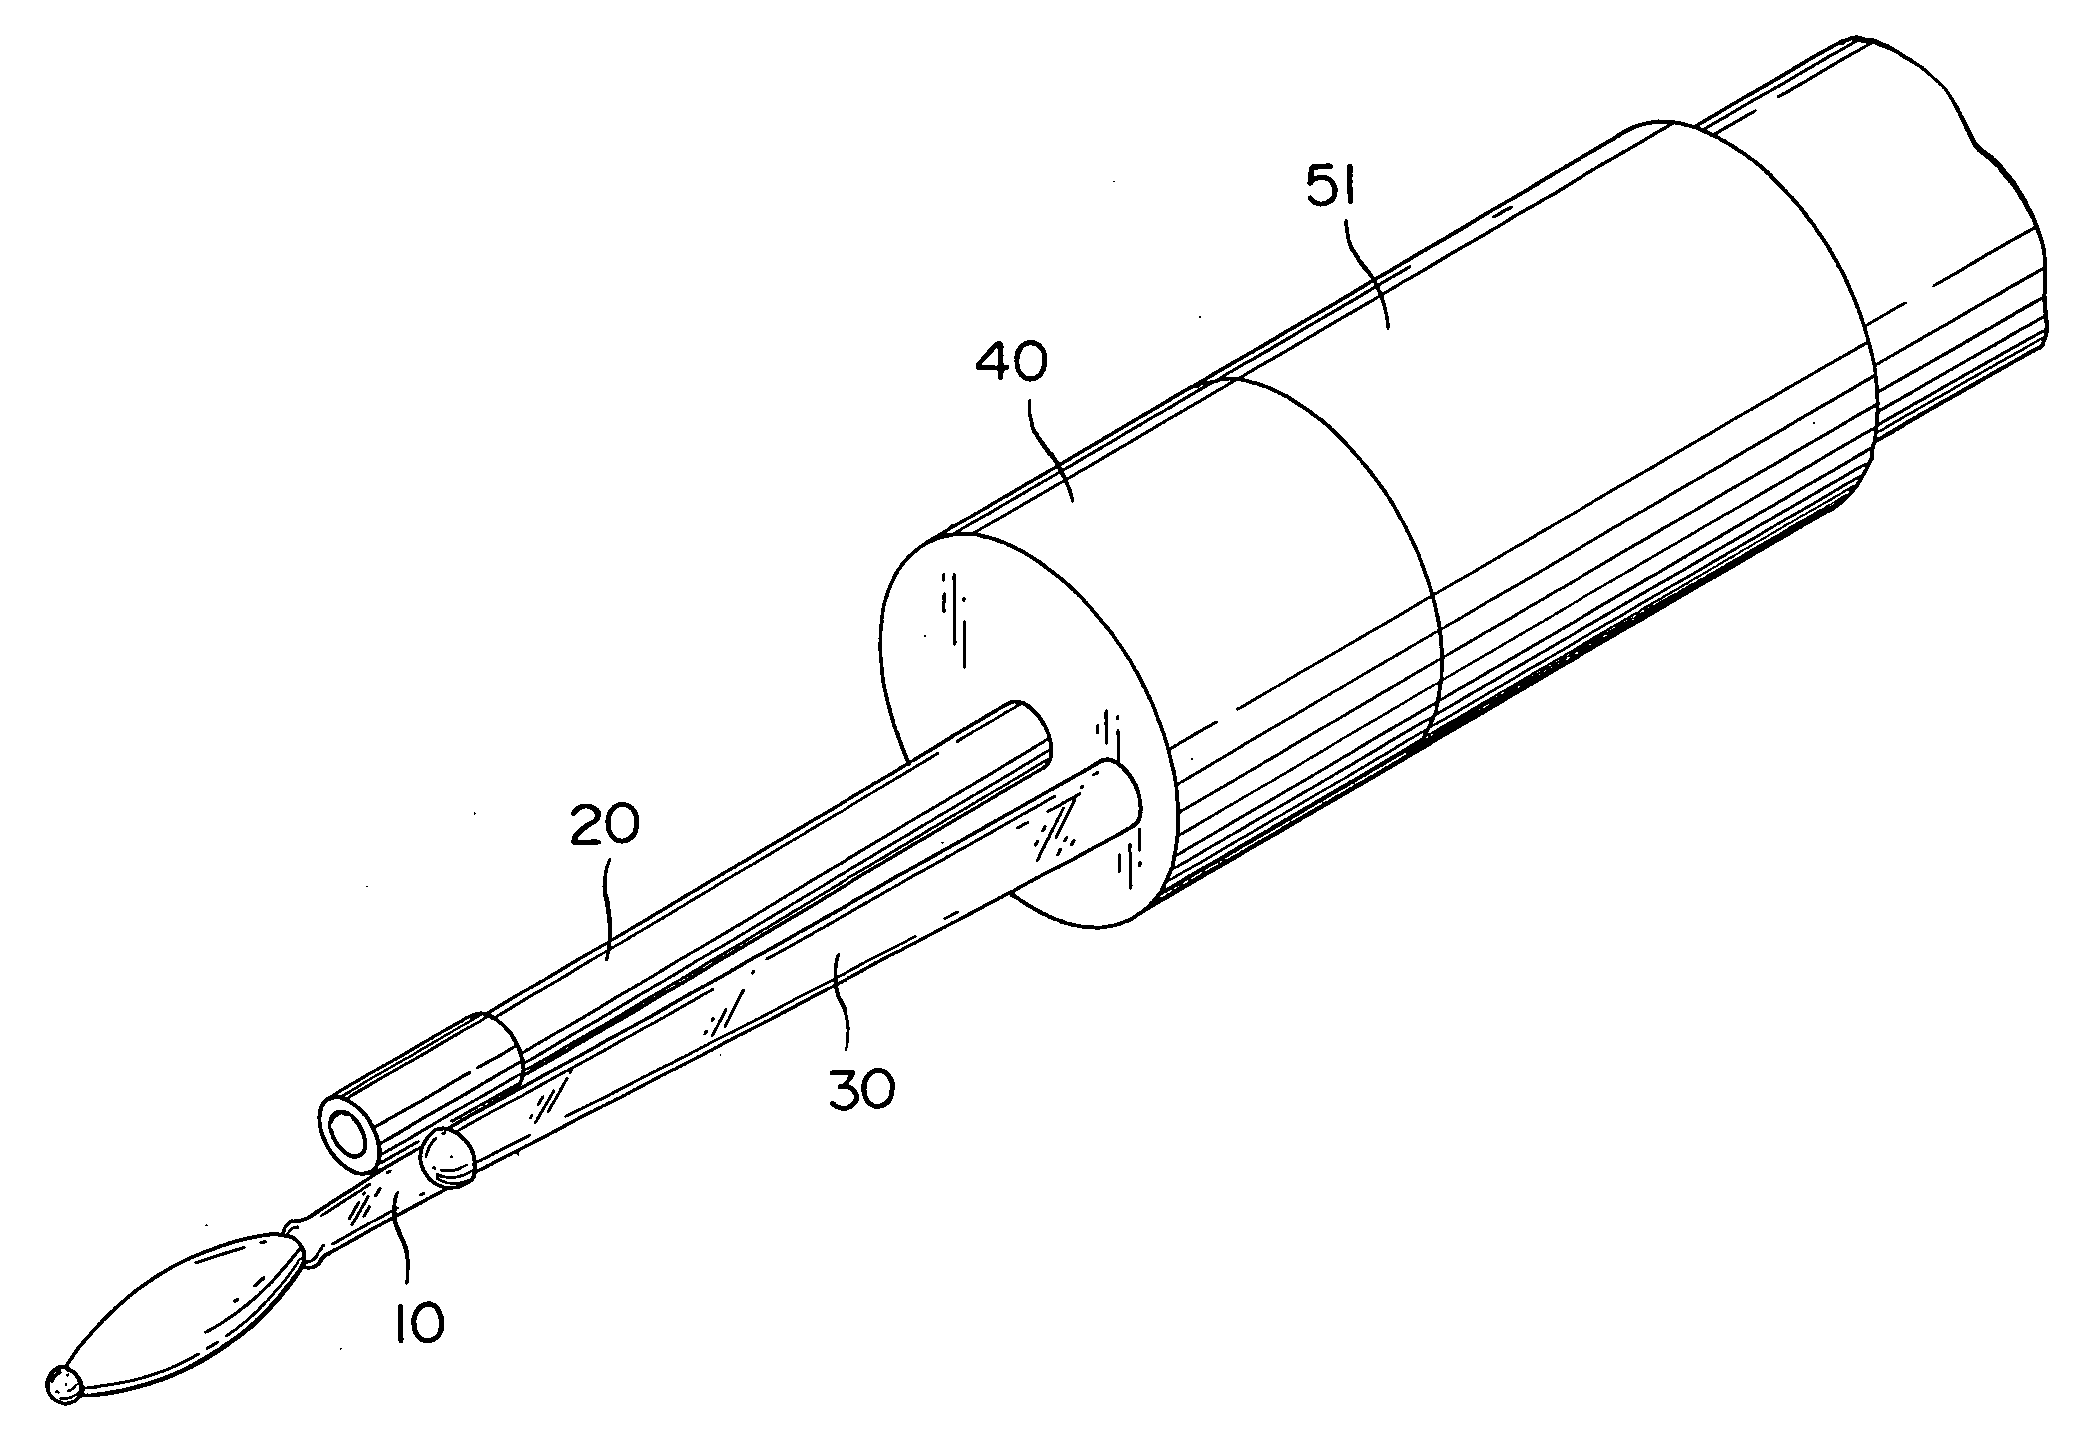 Endoscopic auditory canal cleaning apparatus